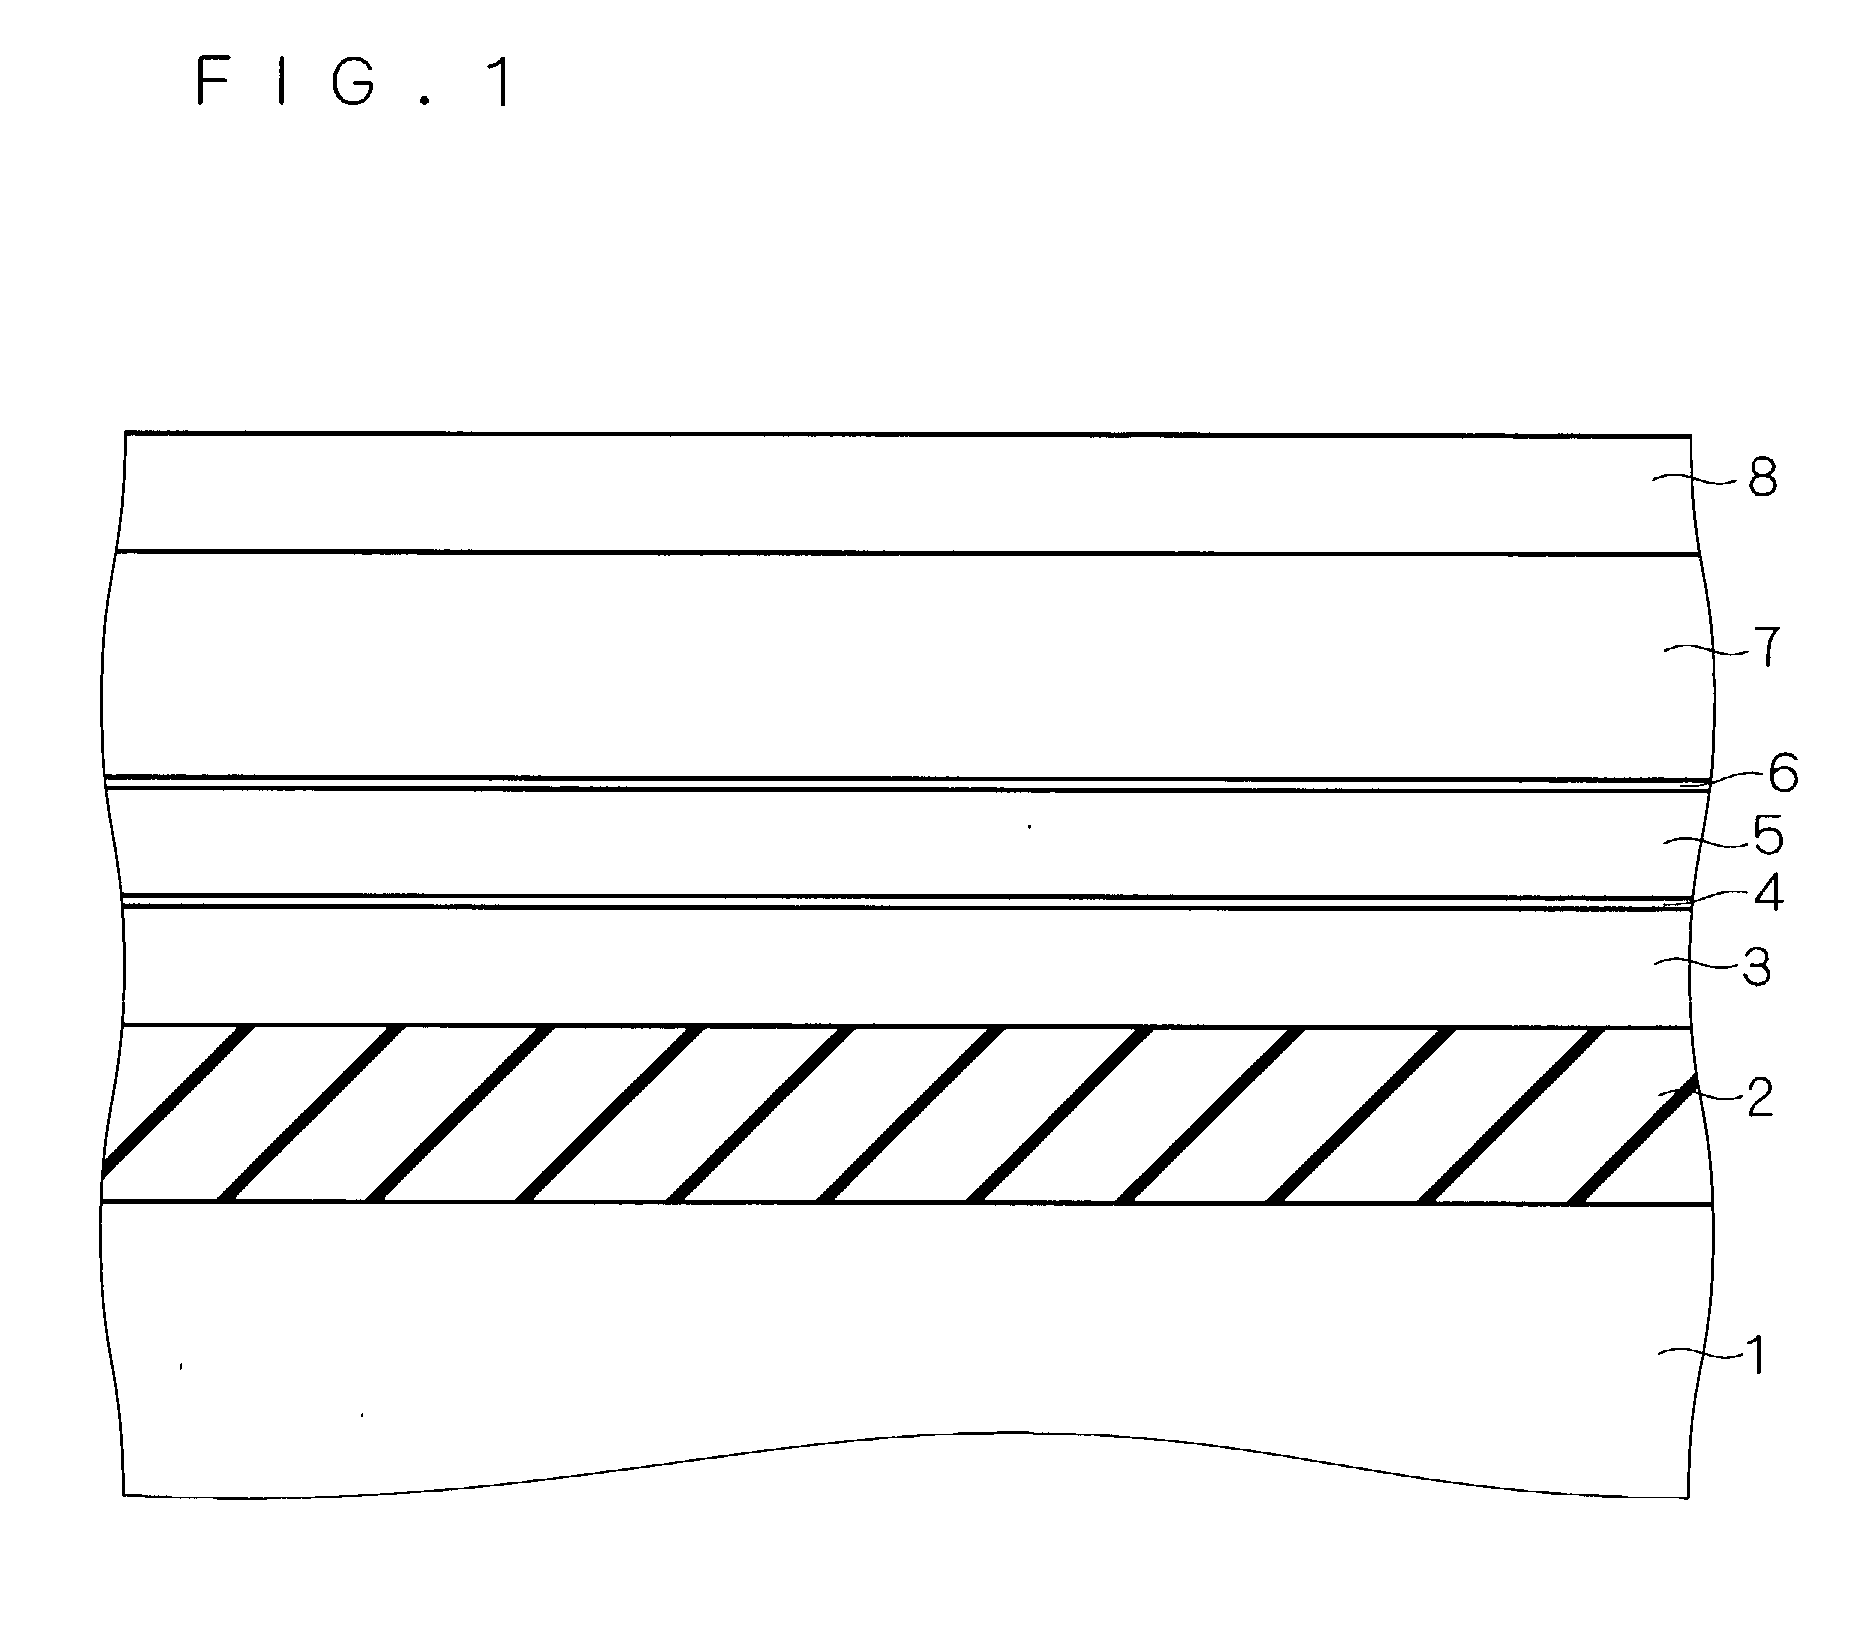 Method of manufacturing semicontor device having trench isolation